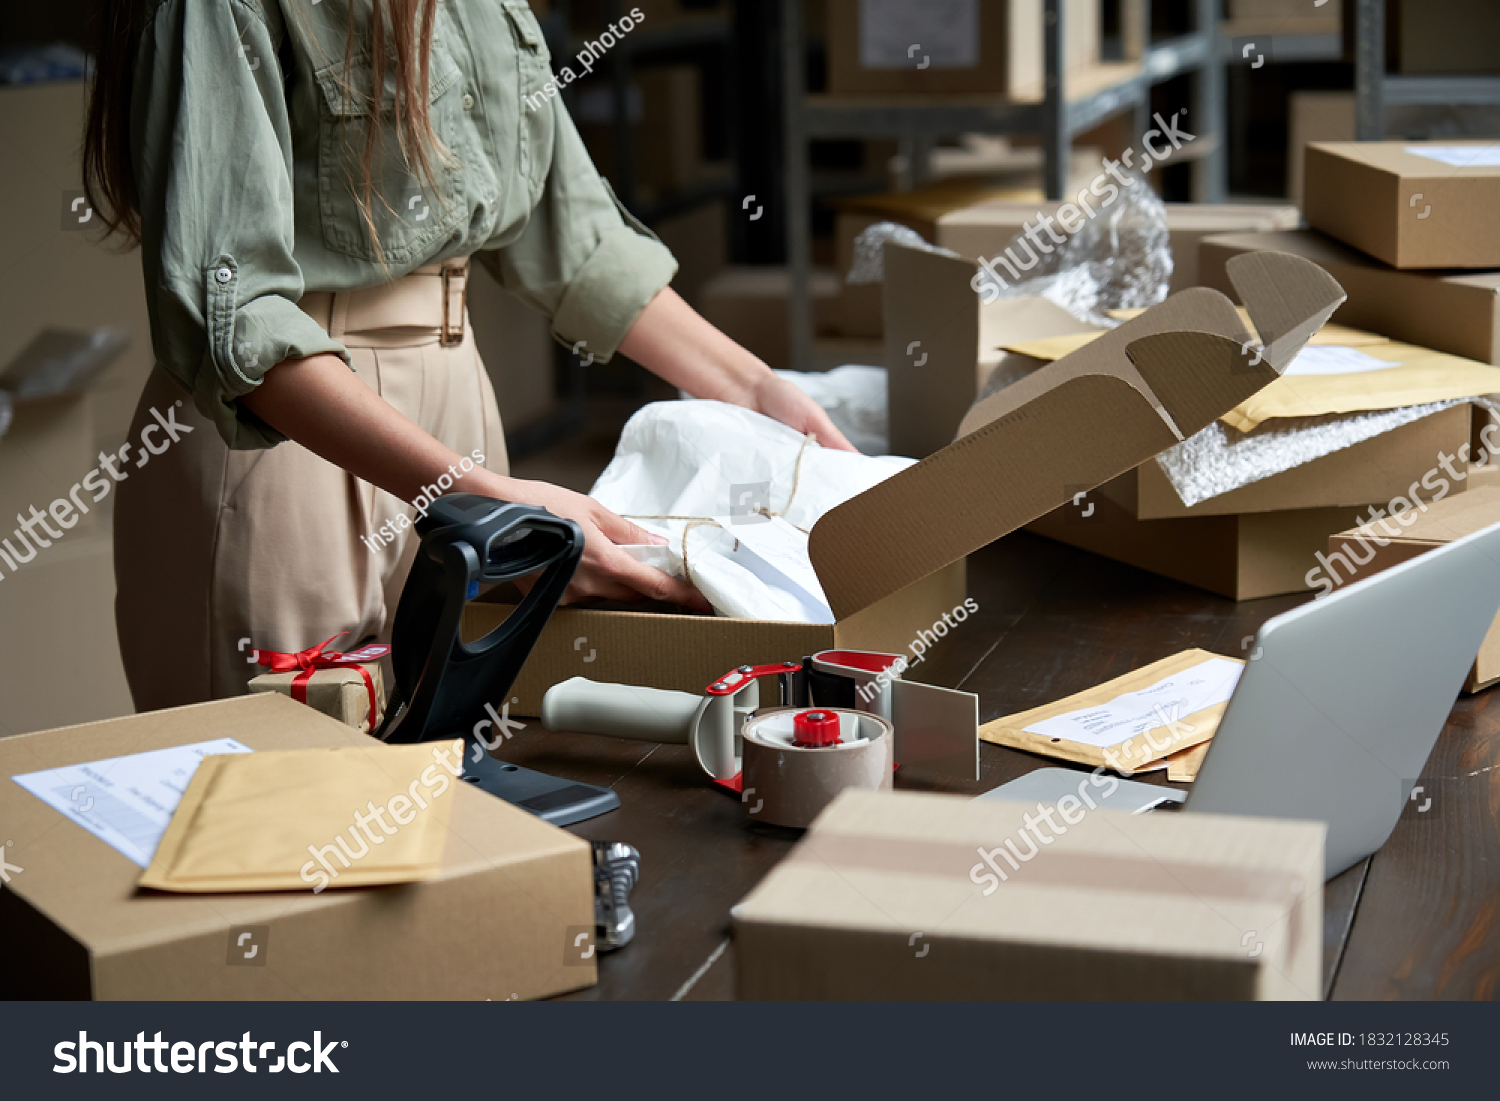 Closeup view of female online store small business owner seller entrepreneur packing package post shipping box preparing delivery parcel on table. Ecommerce dropshipping shipment service concept. #1832128345